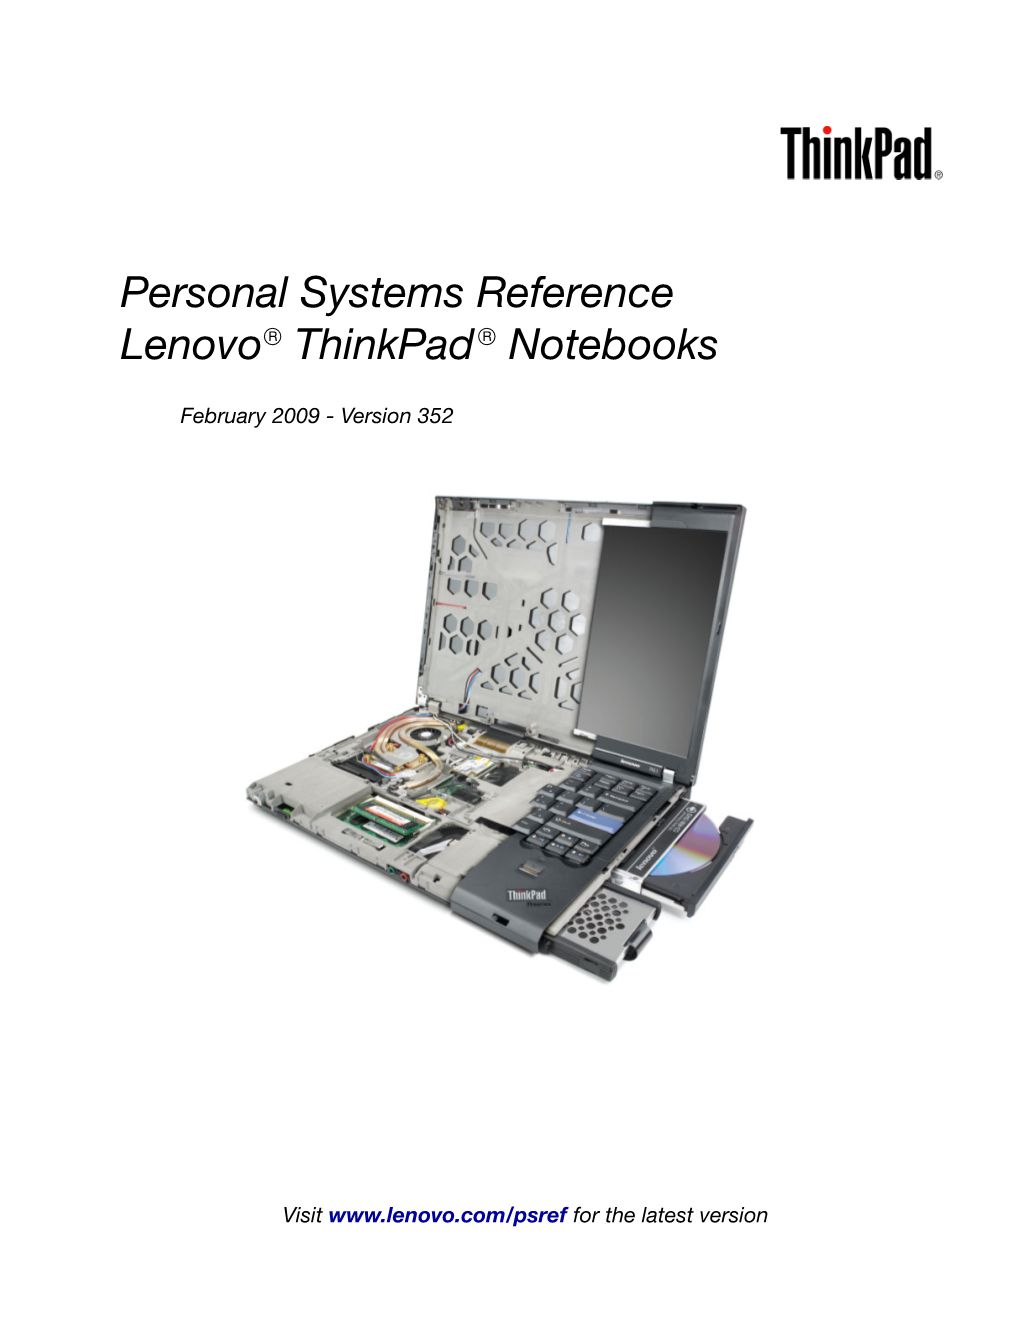 Personal Systems Reference Lenovo Thinkpad Notebooks